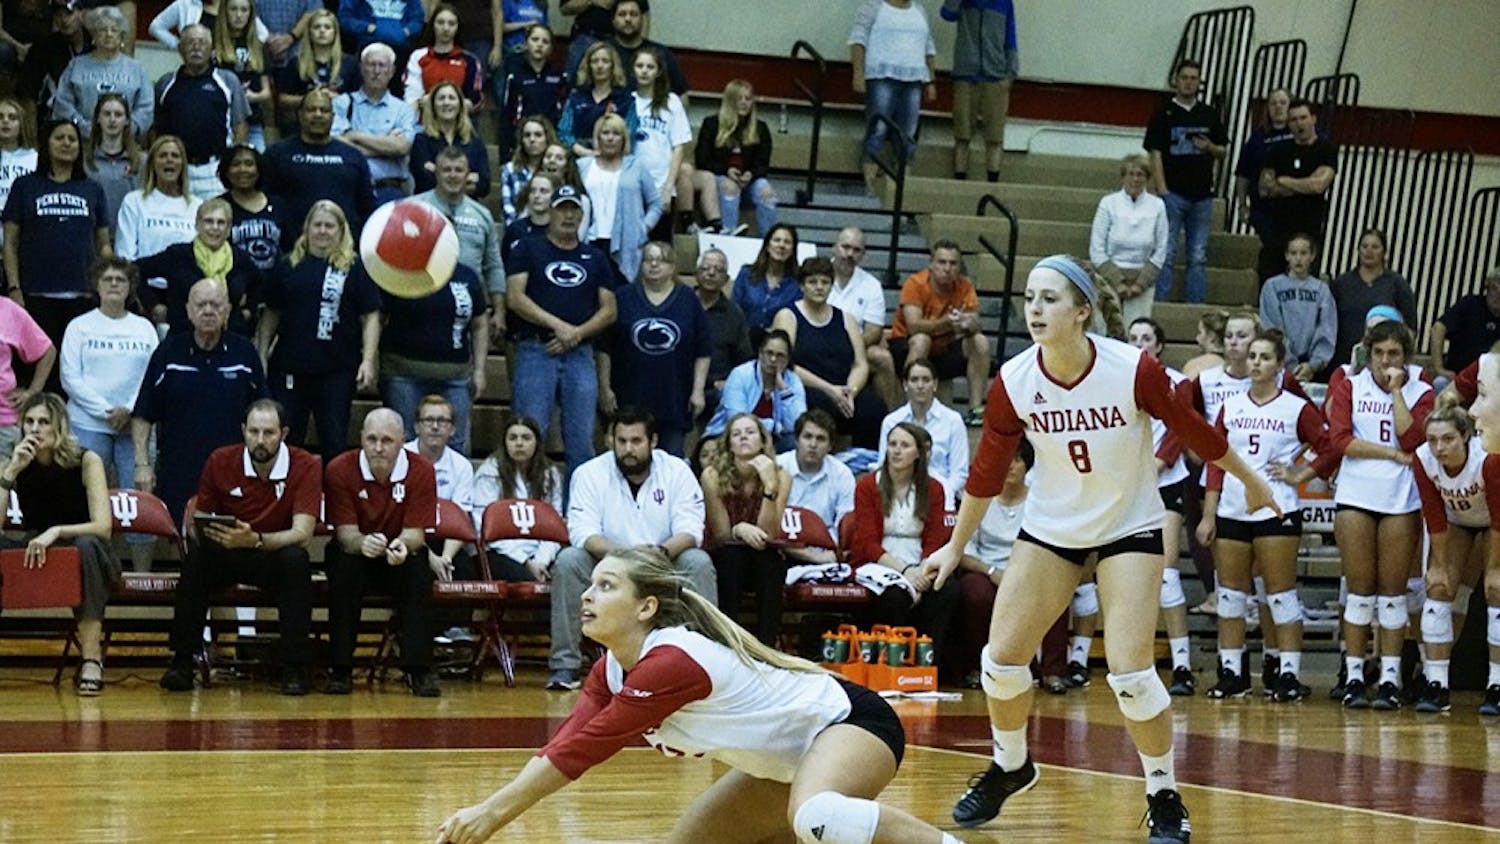 Then-junior Samantha Fogg dives to return the ball against the Penn State on Oct. 21, 2017. IU opens its 2018 season this weekend in Las Vegas.